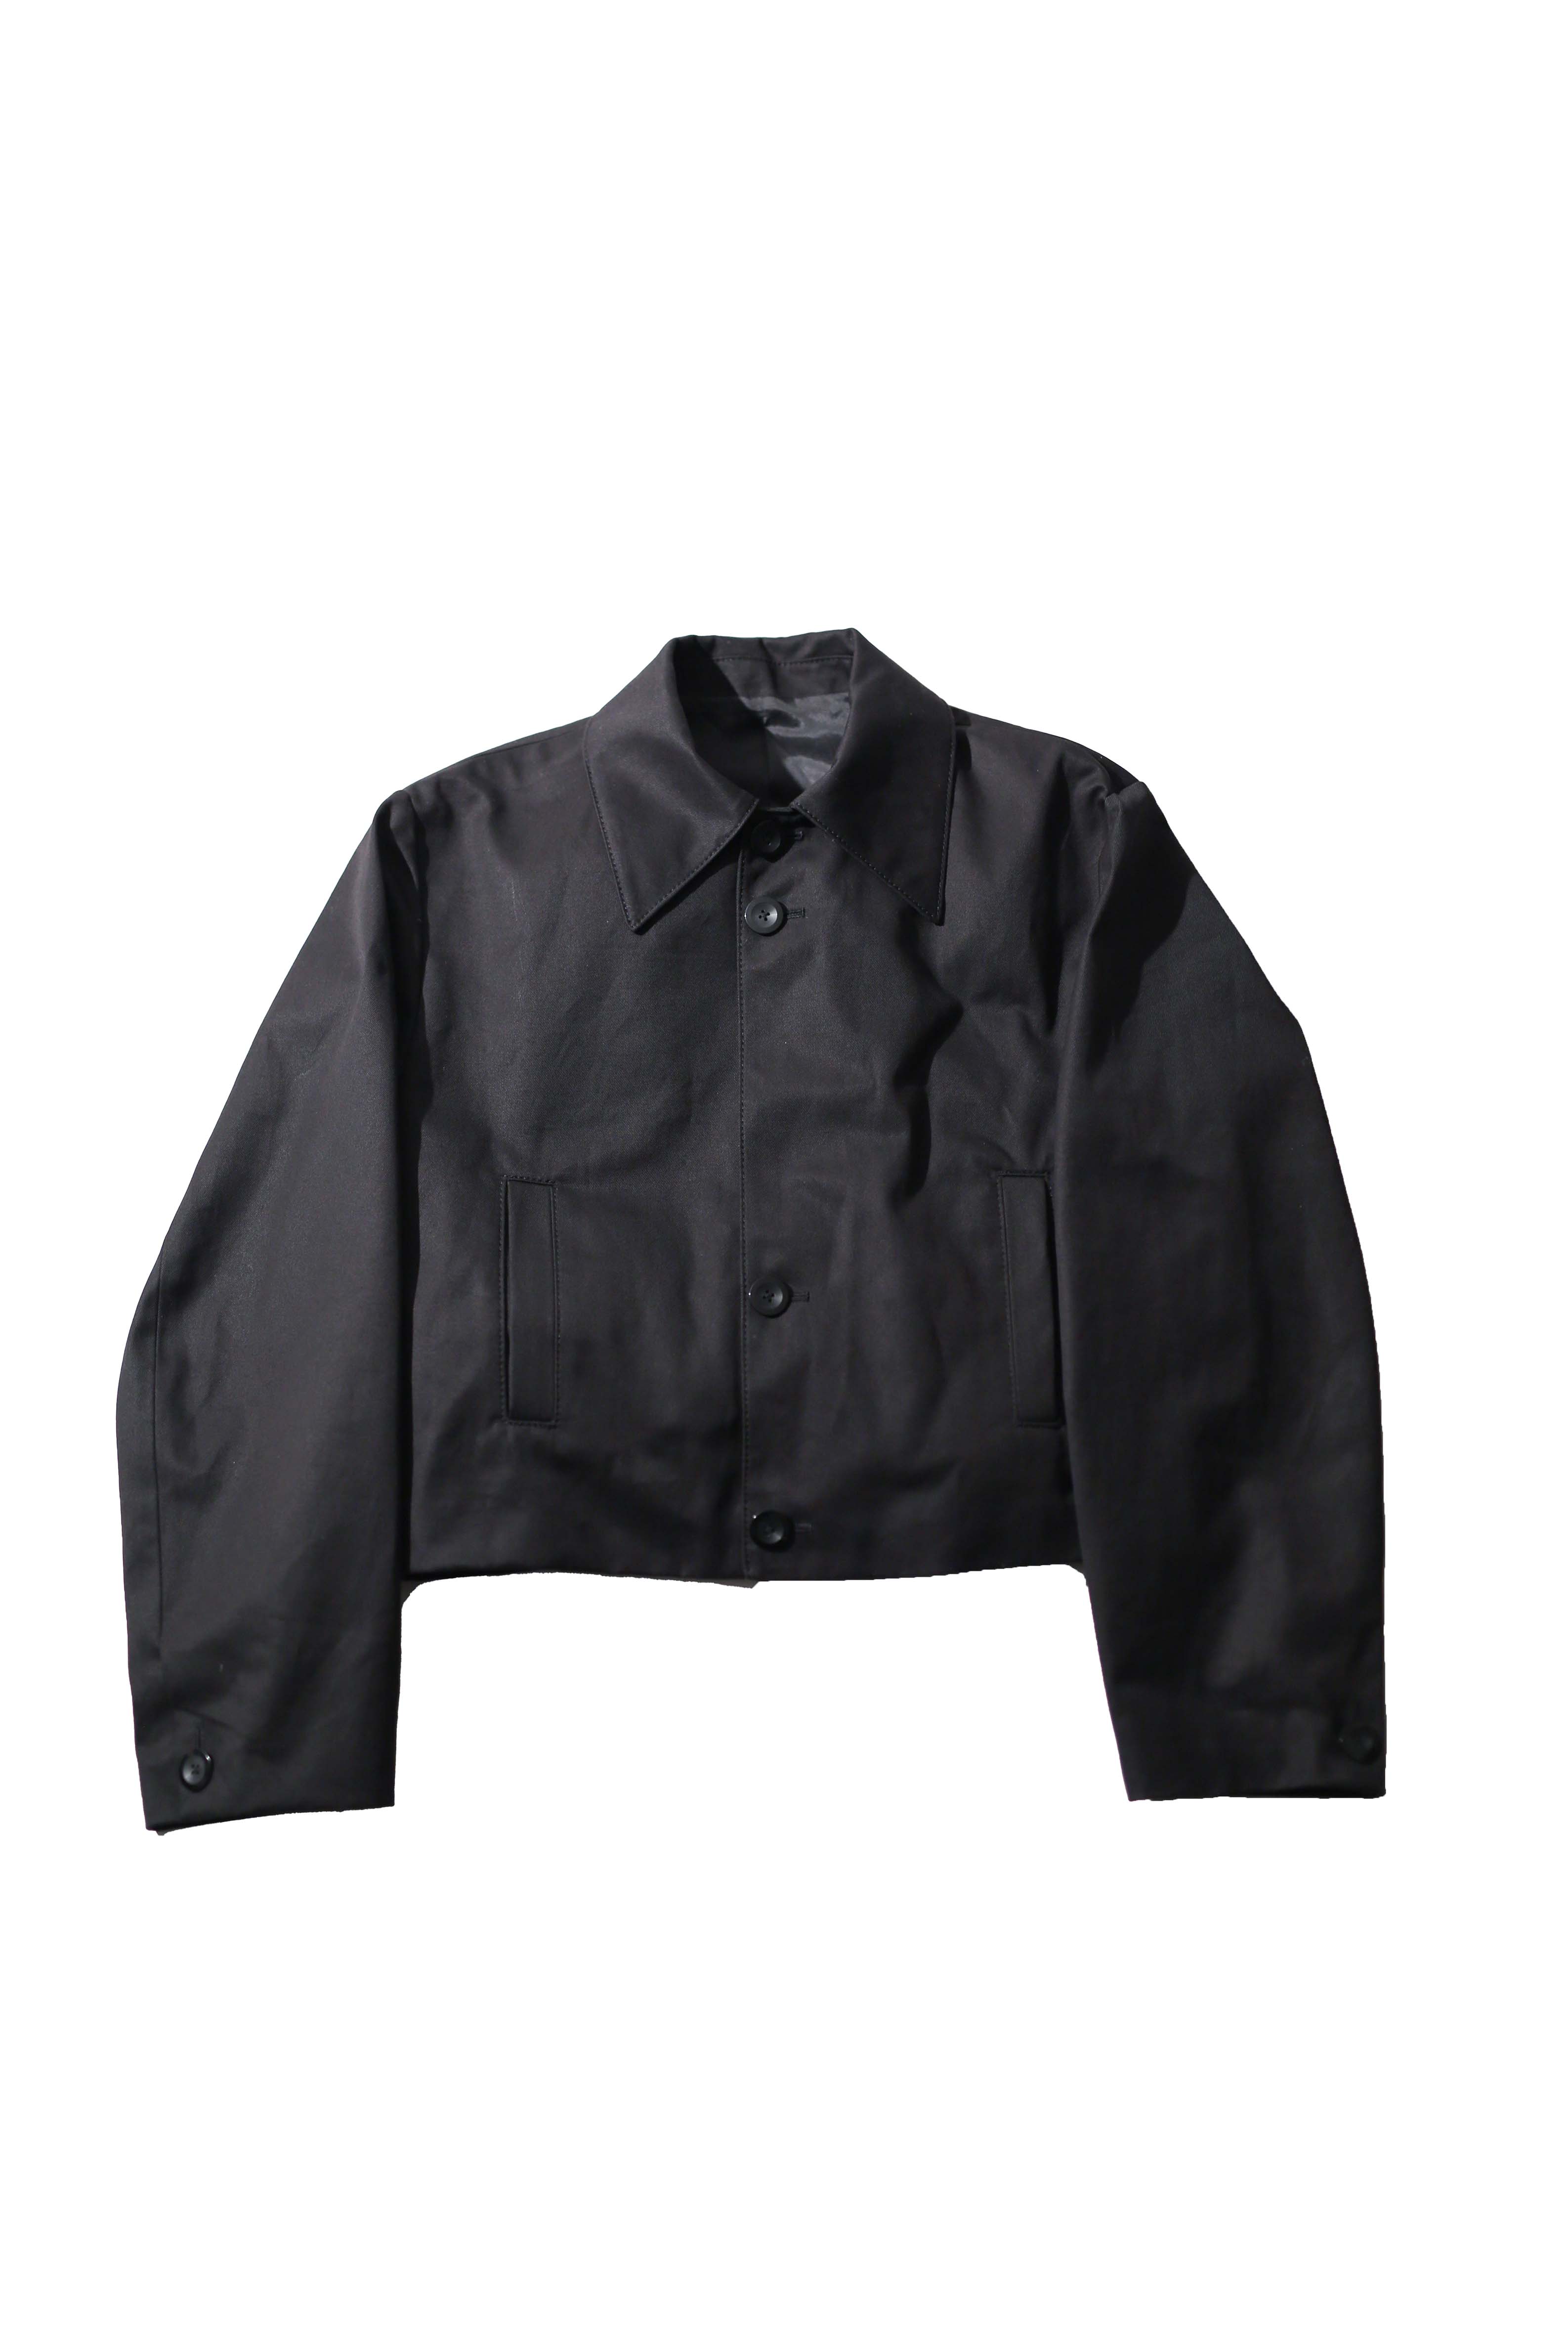 our's strong 002 SHORT JACKET - テーラードジャケット